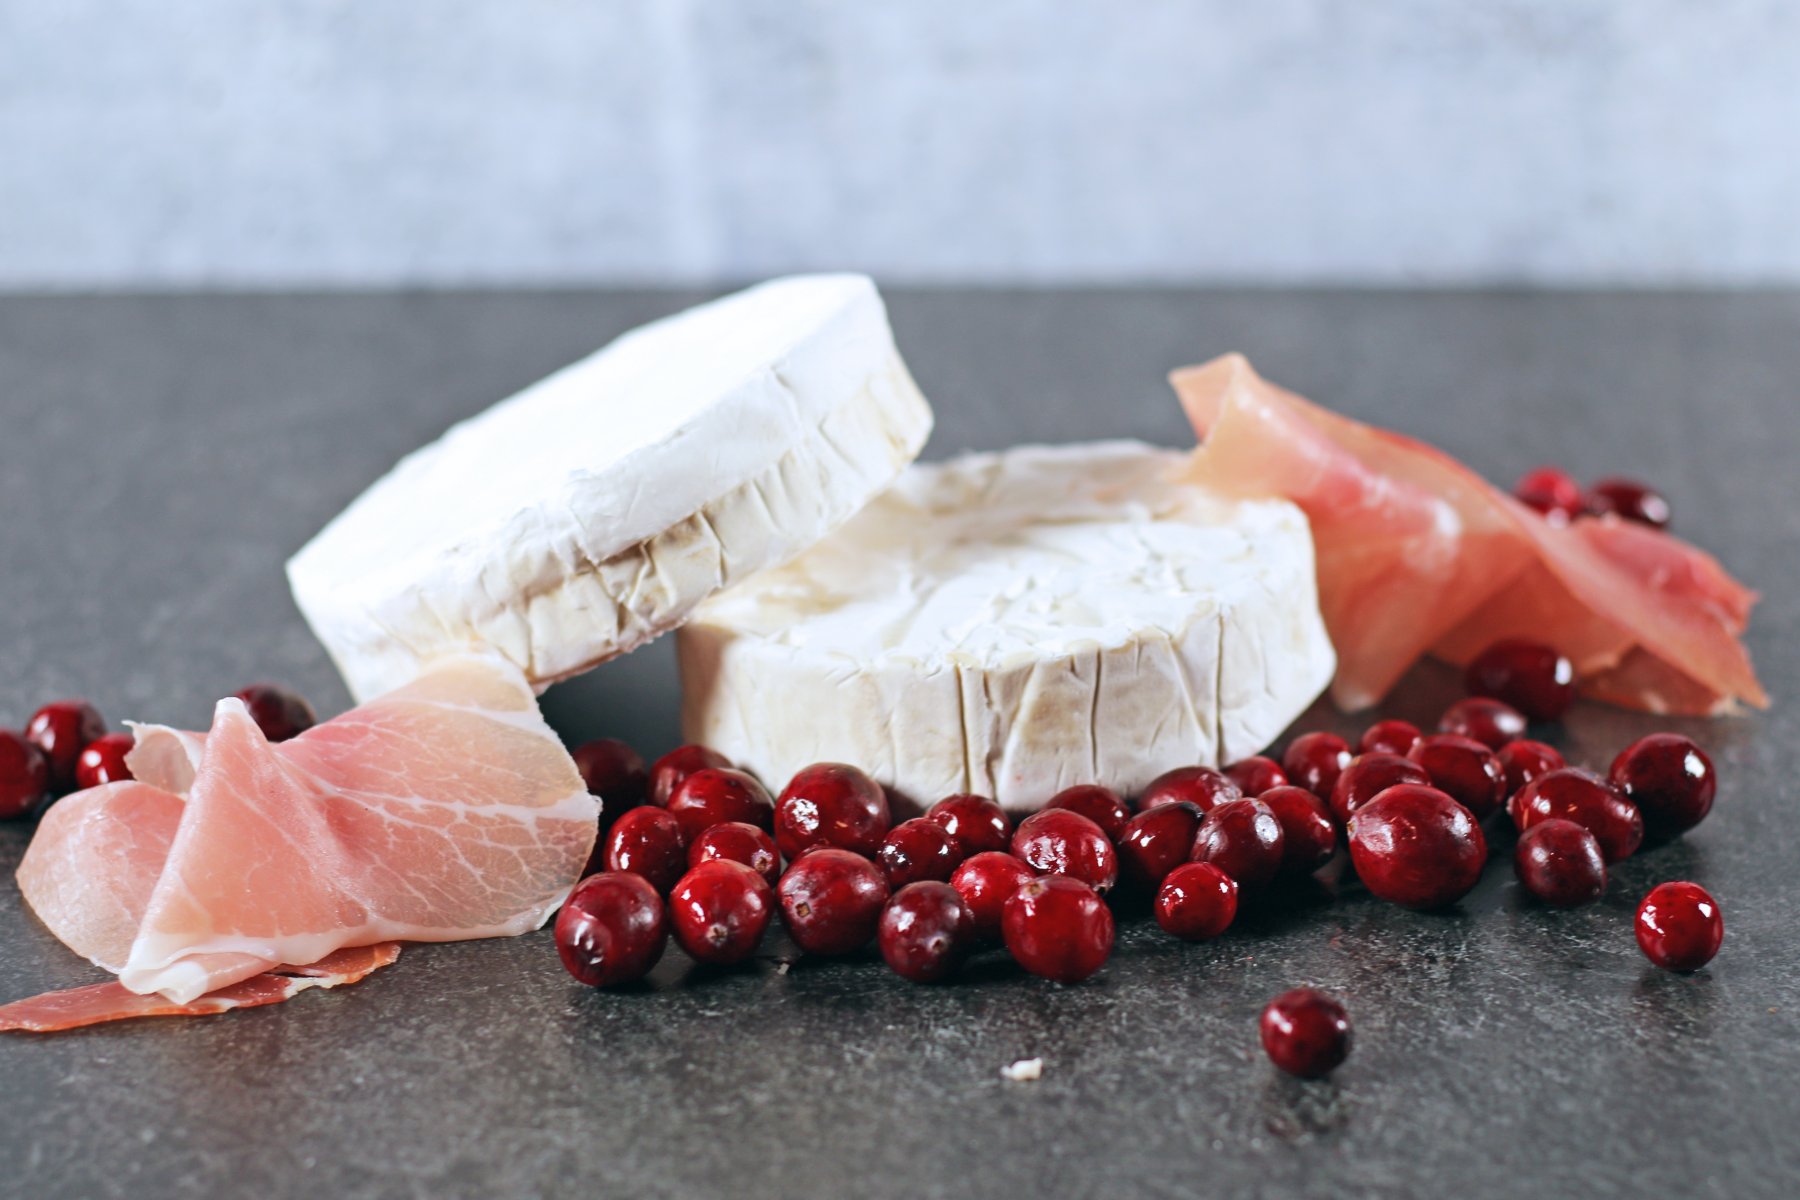 INGREDIENTS - BRIE CRANBERRIES AND PROSCUITTO